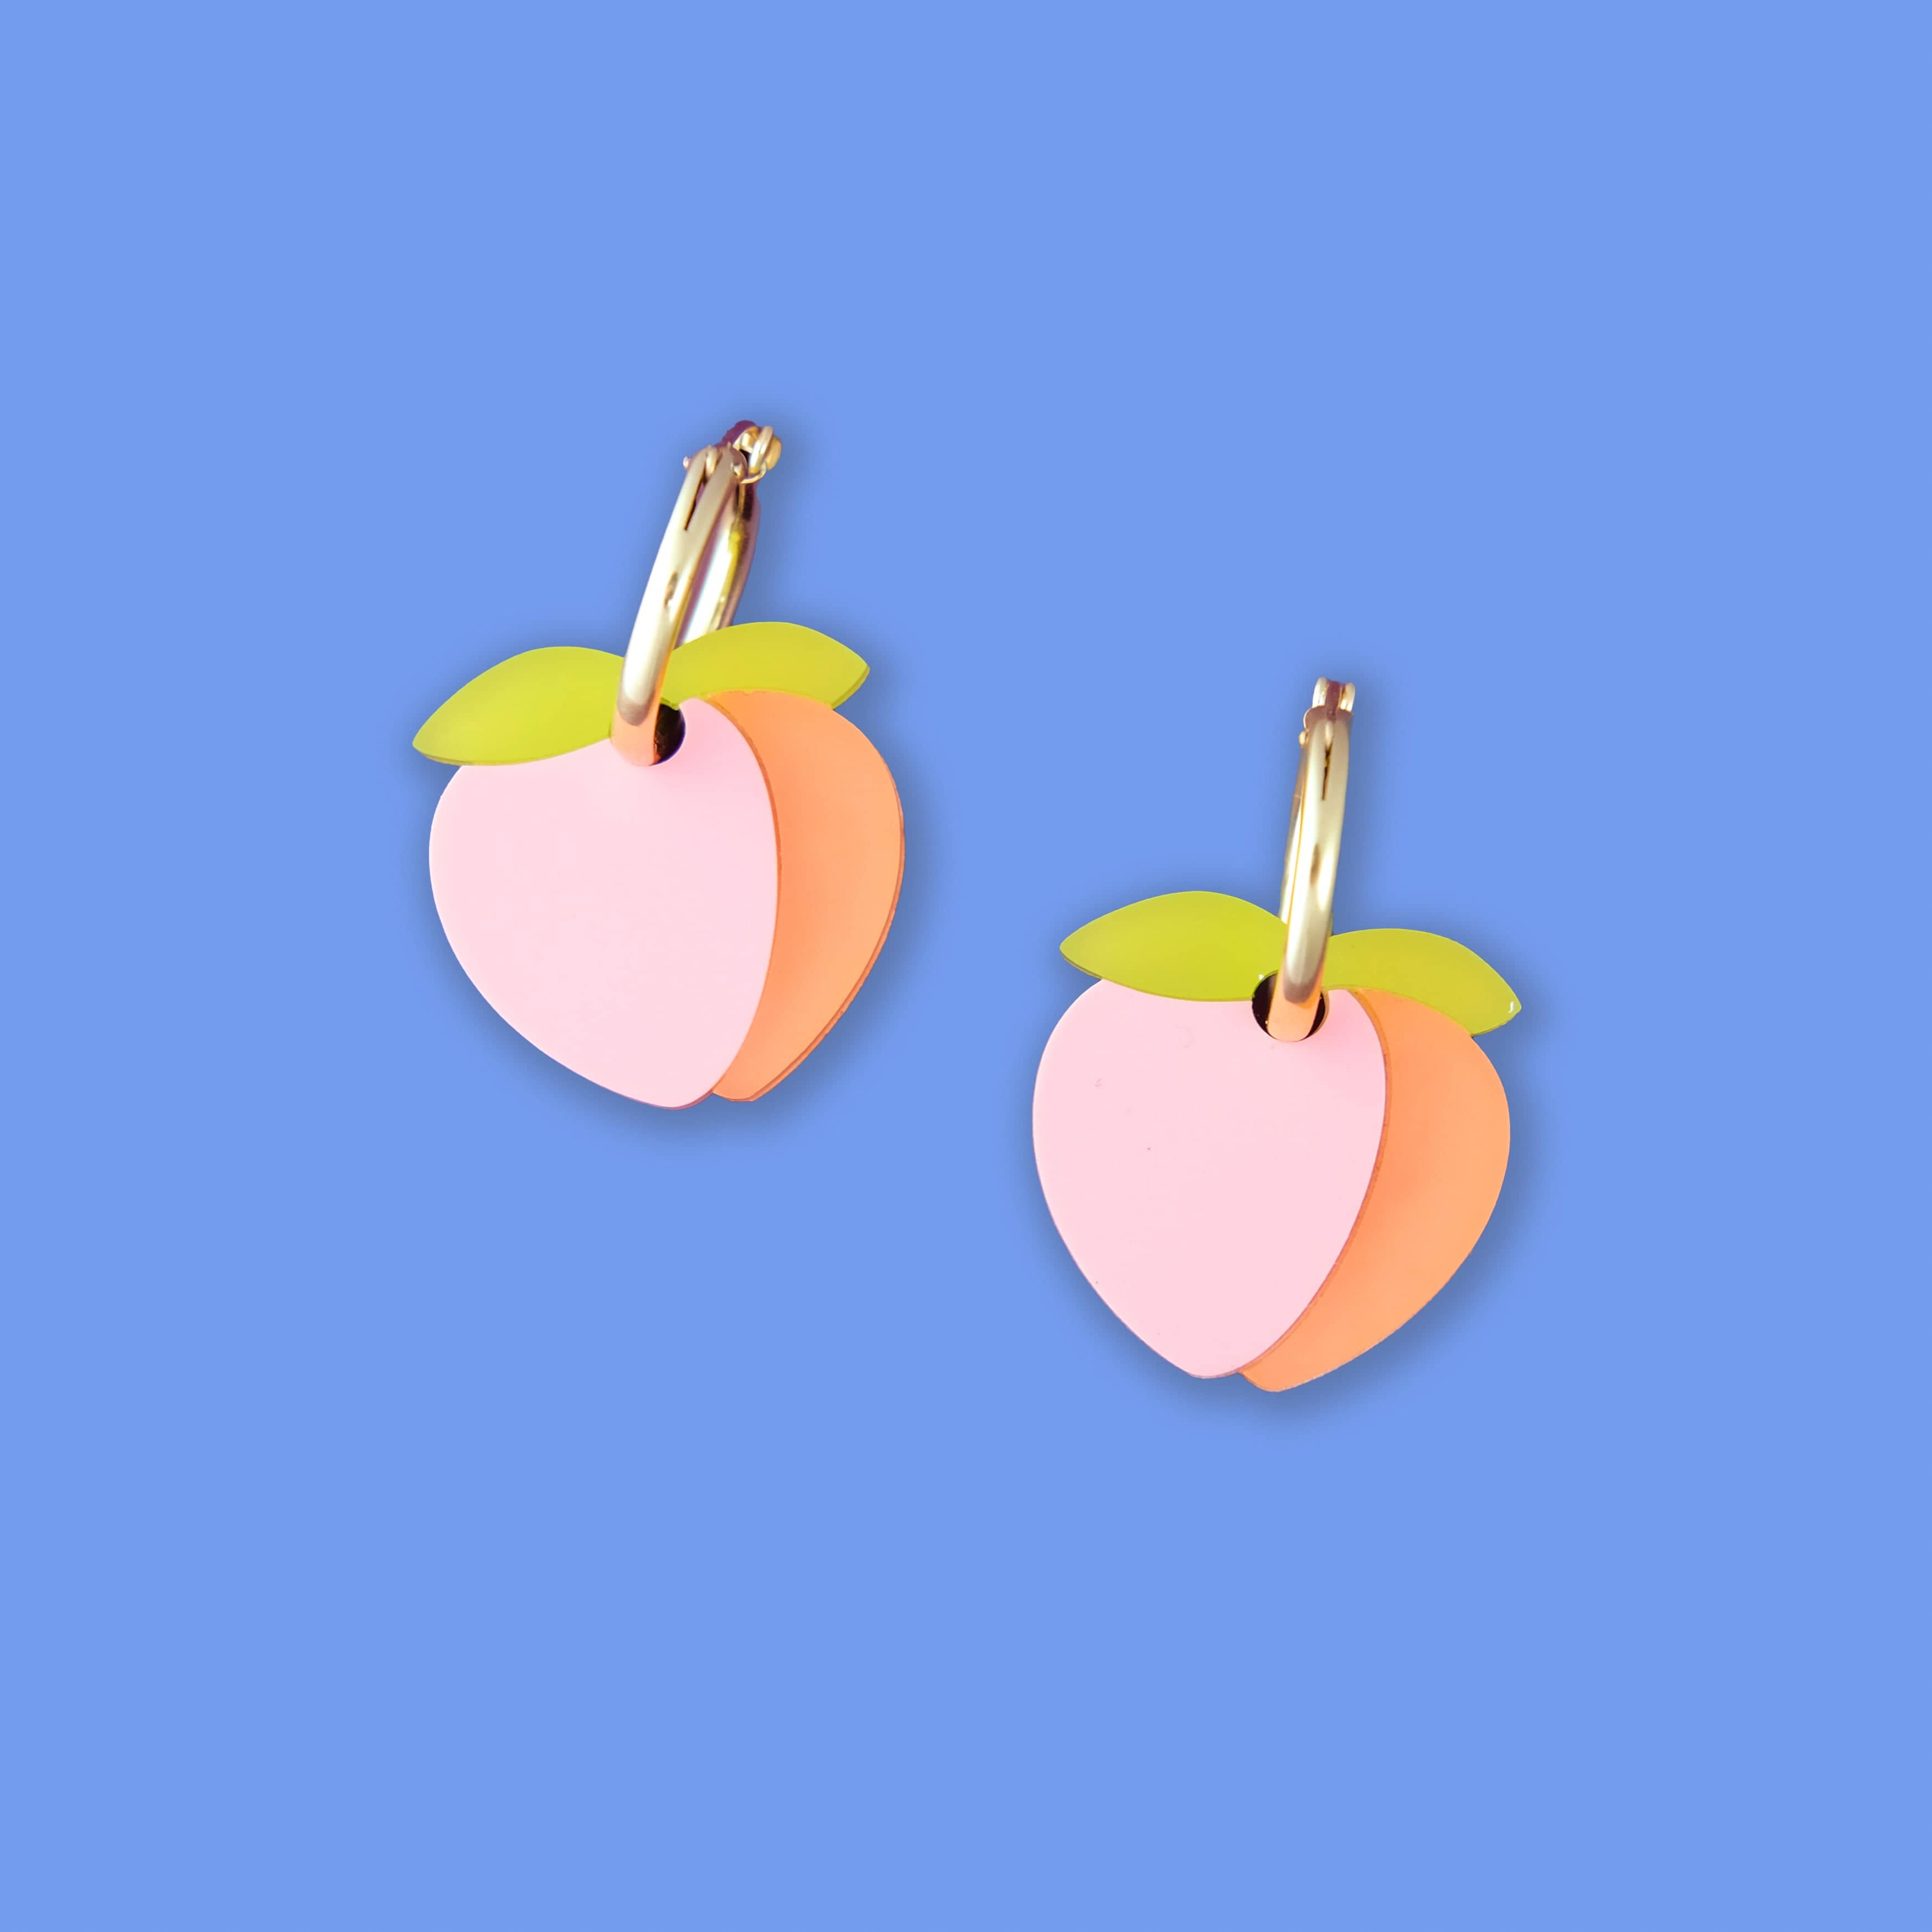 Cute, dainty and lightweight Peach dangly earrings with gold-filled hoops